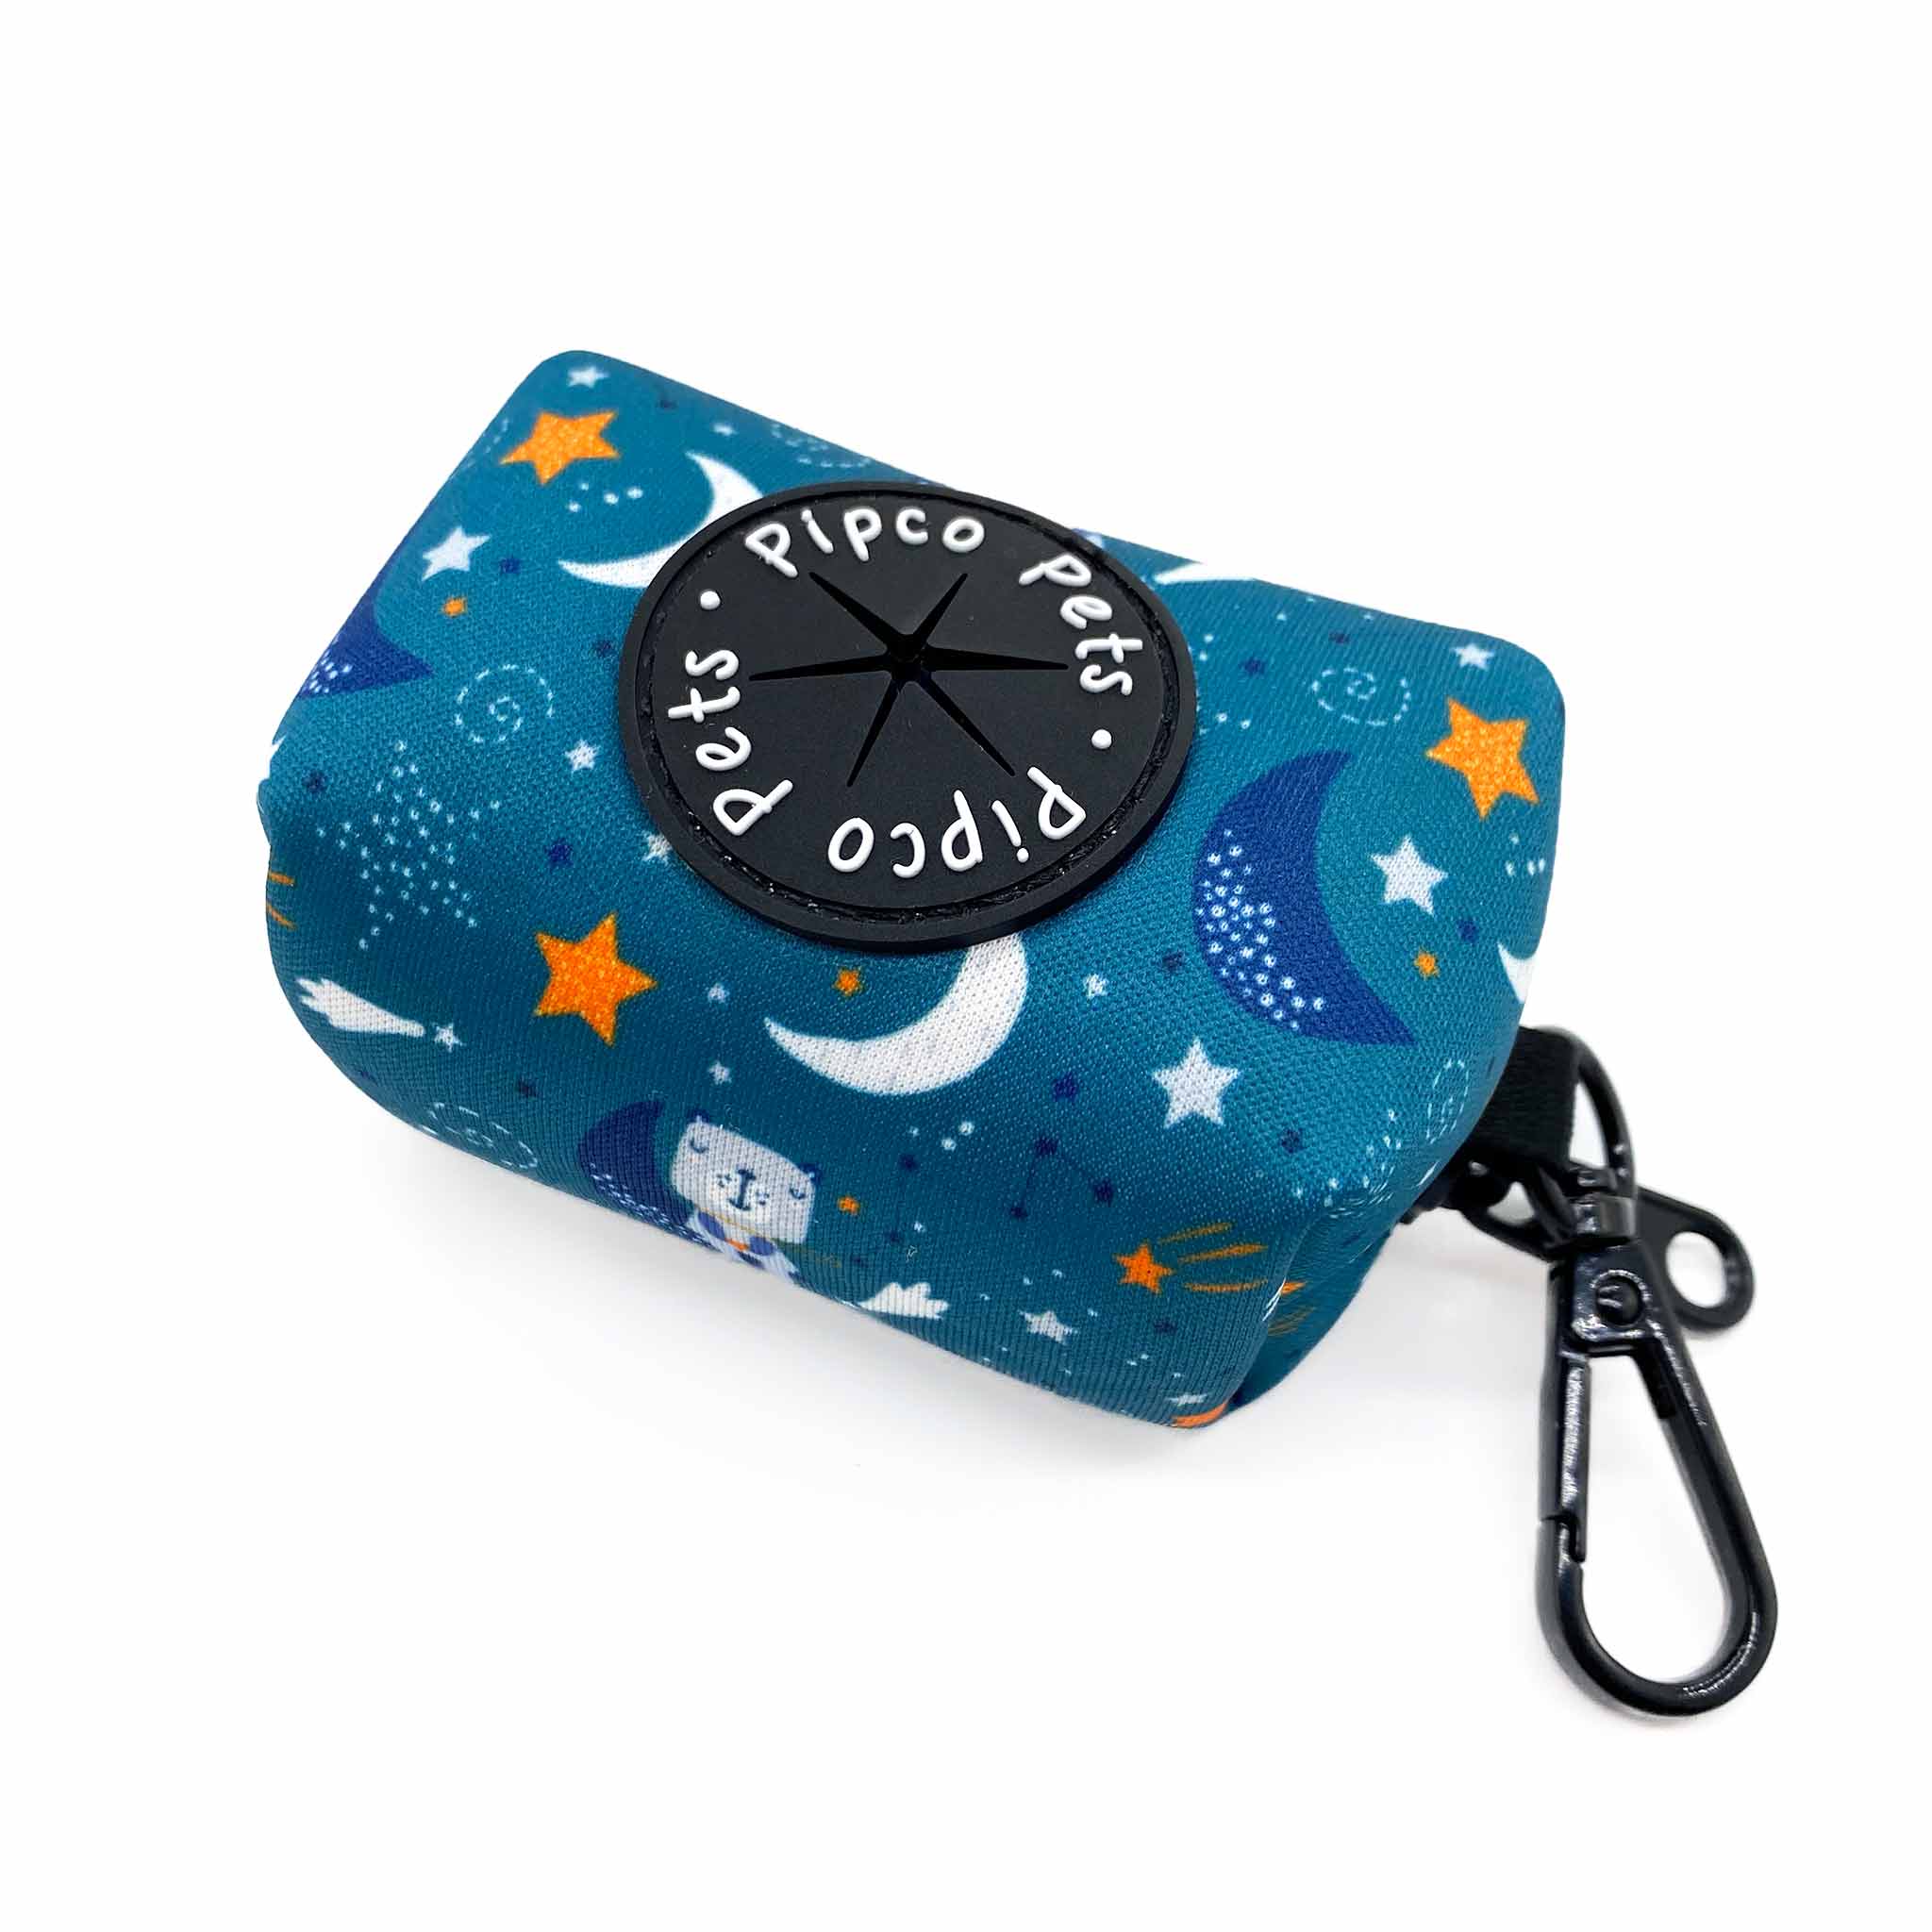 Pipco Pets dog poo bag dispenser with Starry Night outer space and stars print pattern in teal